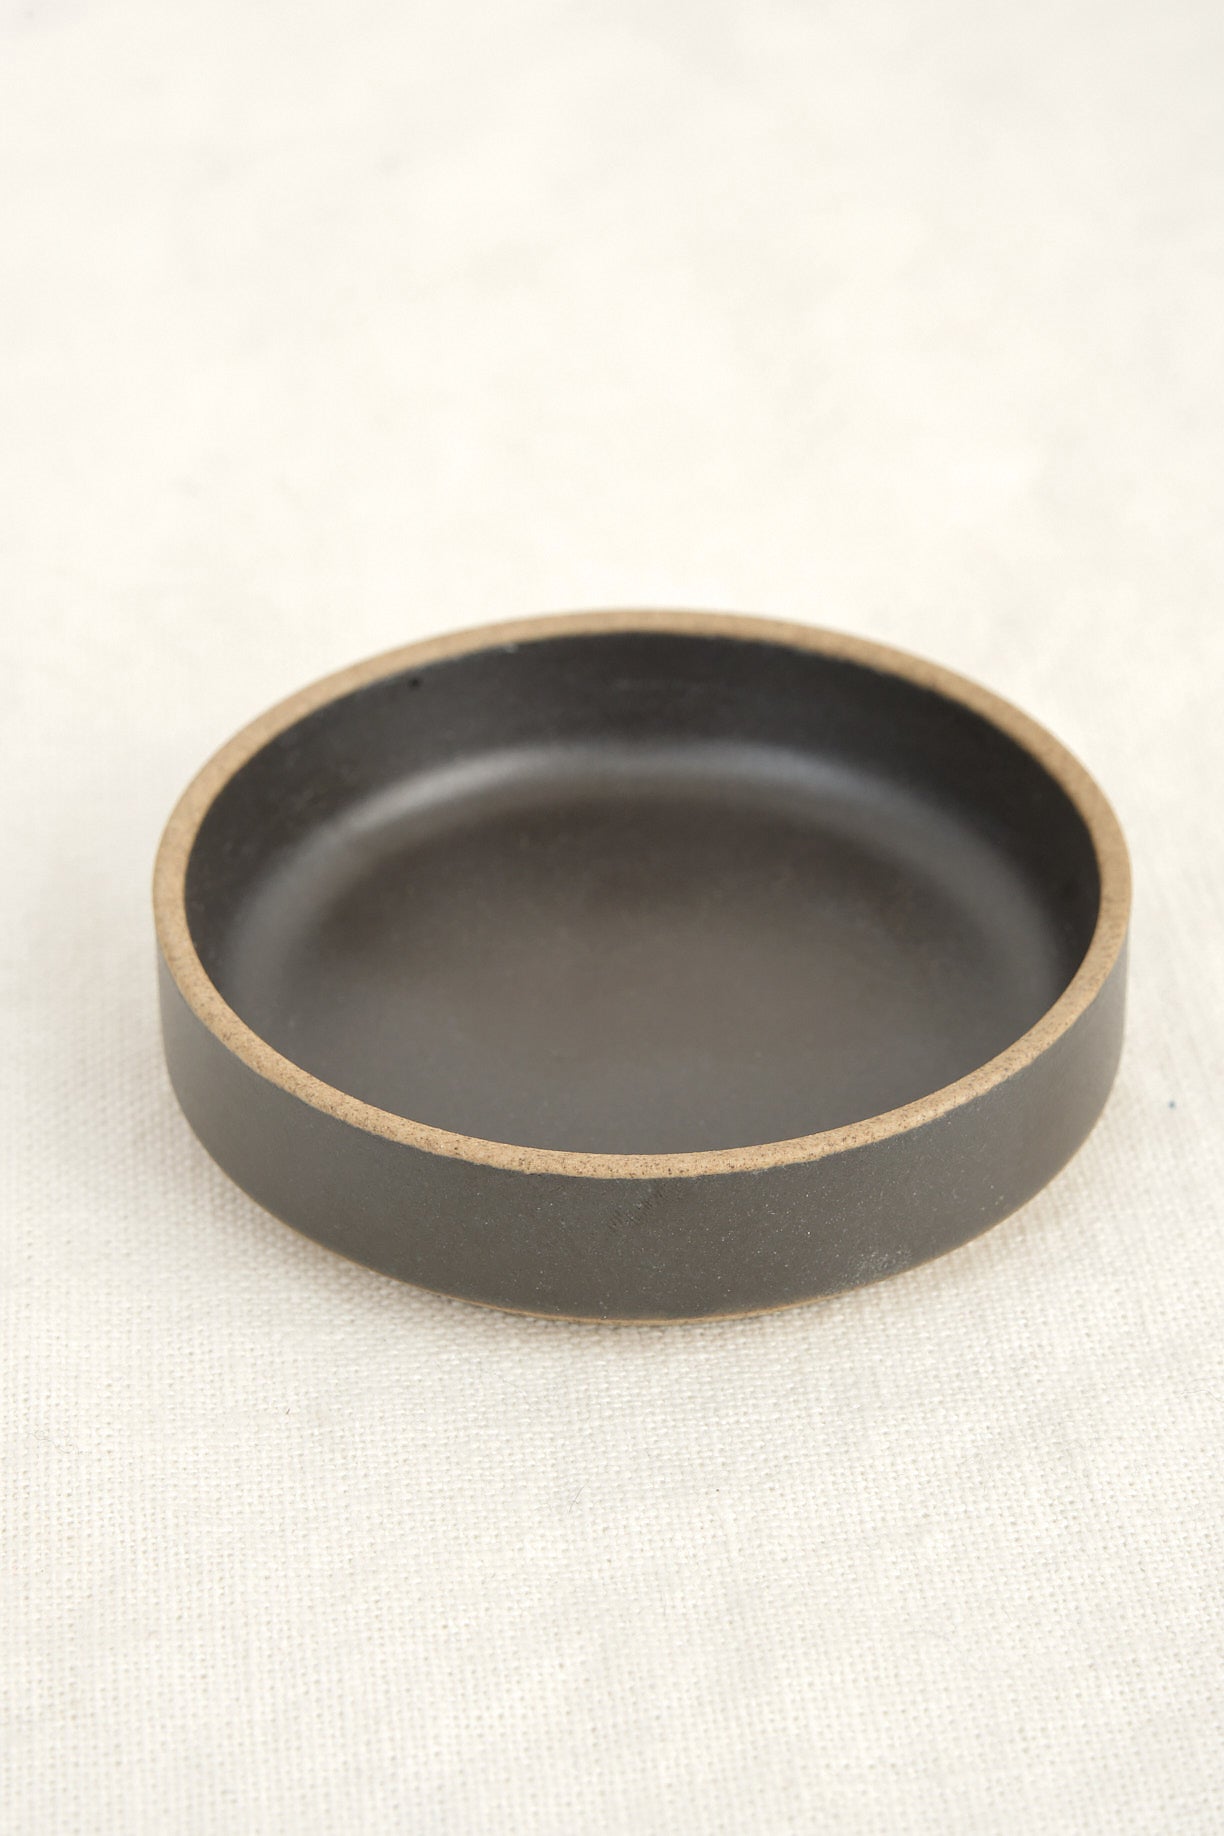 Hasami Porcelain black small plate